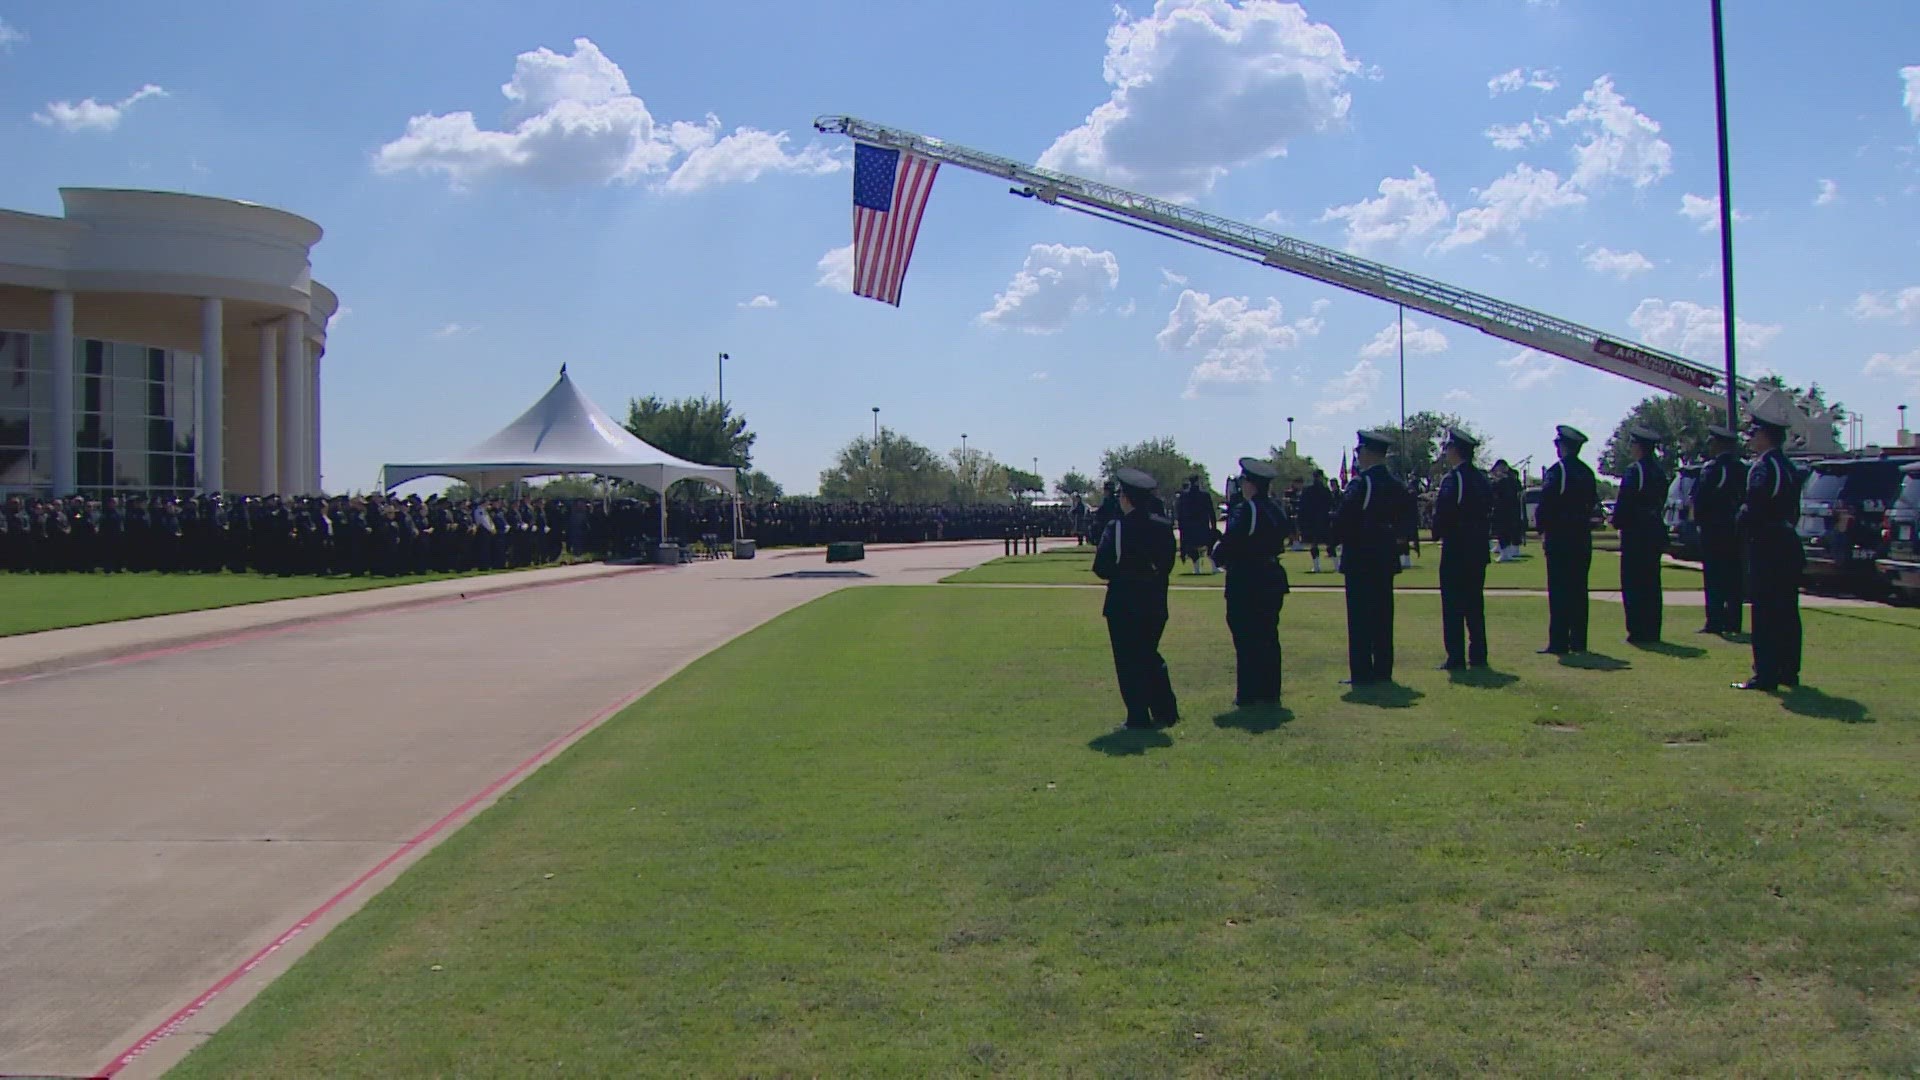 Officers traveled to North Texas from all over the country to join Darrin McMichael's family and friends in celebrating his life.